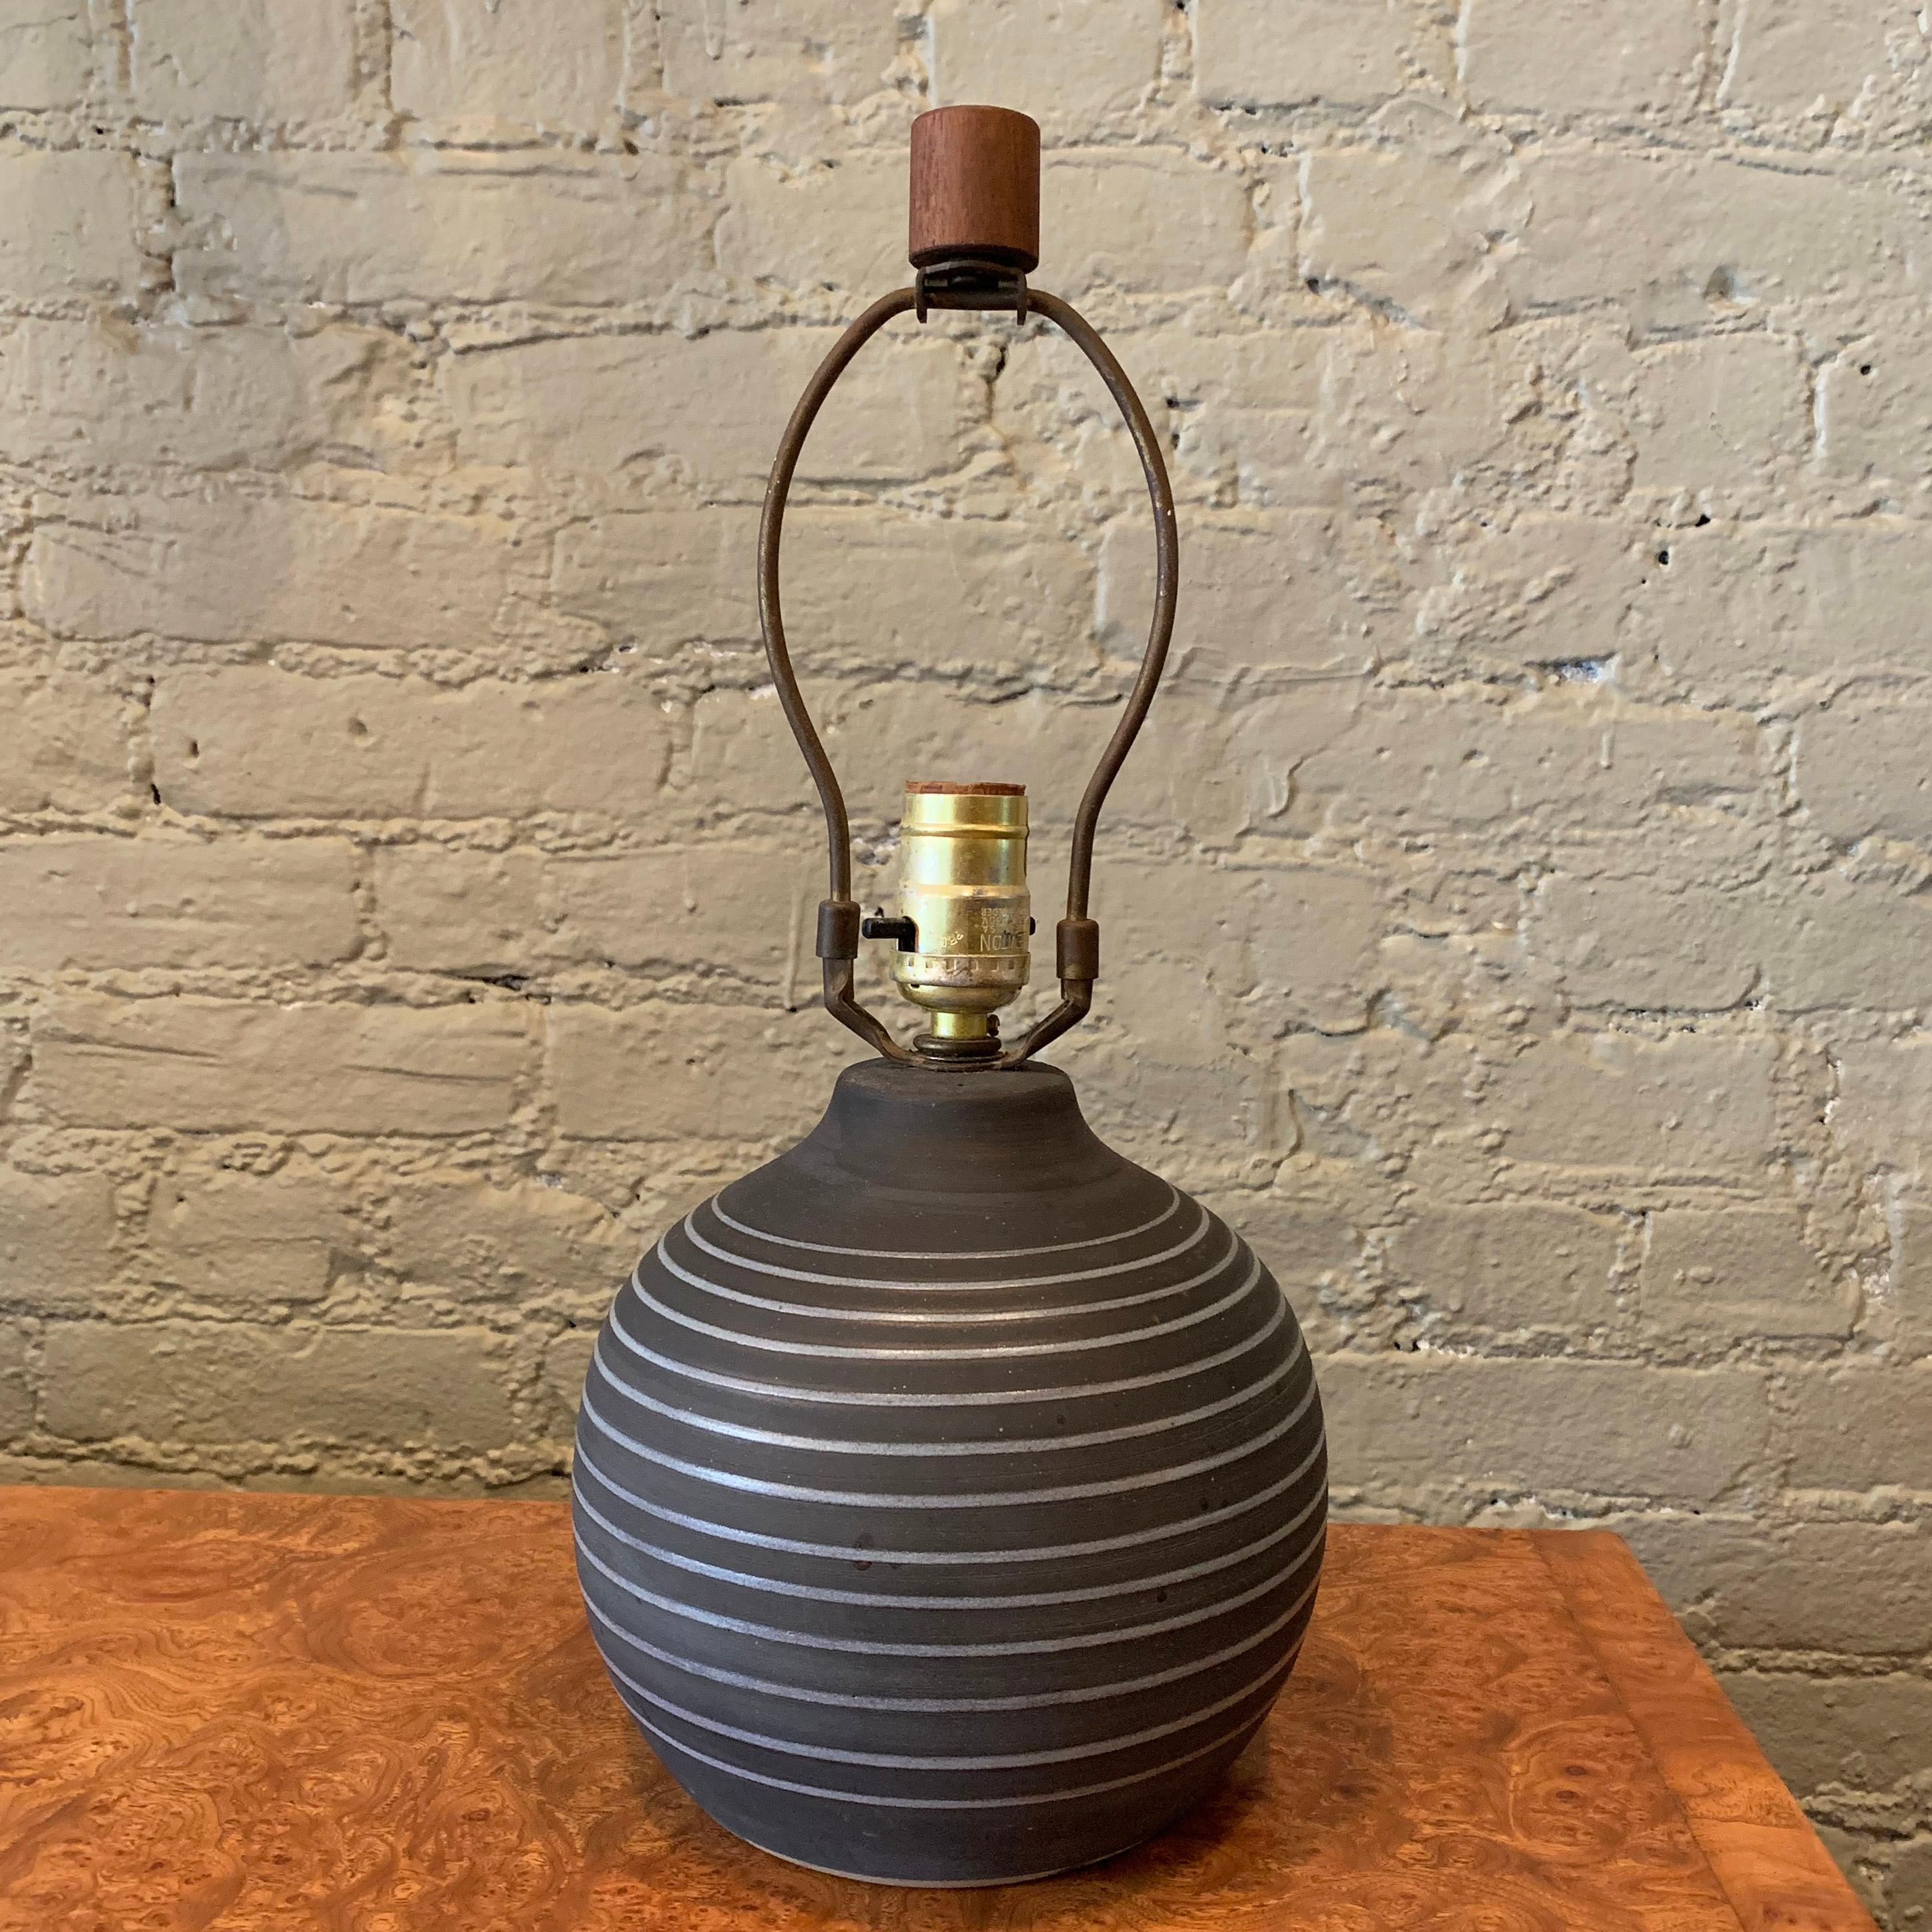 Mid-Century Modern, studio art pottery, table lamp by Gordon Martz for Marshall Studios features a charcoal gray, gourd shape body with swirl motif and walnut finial. The height of the lamp to the socket is 10 inches.